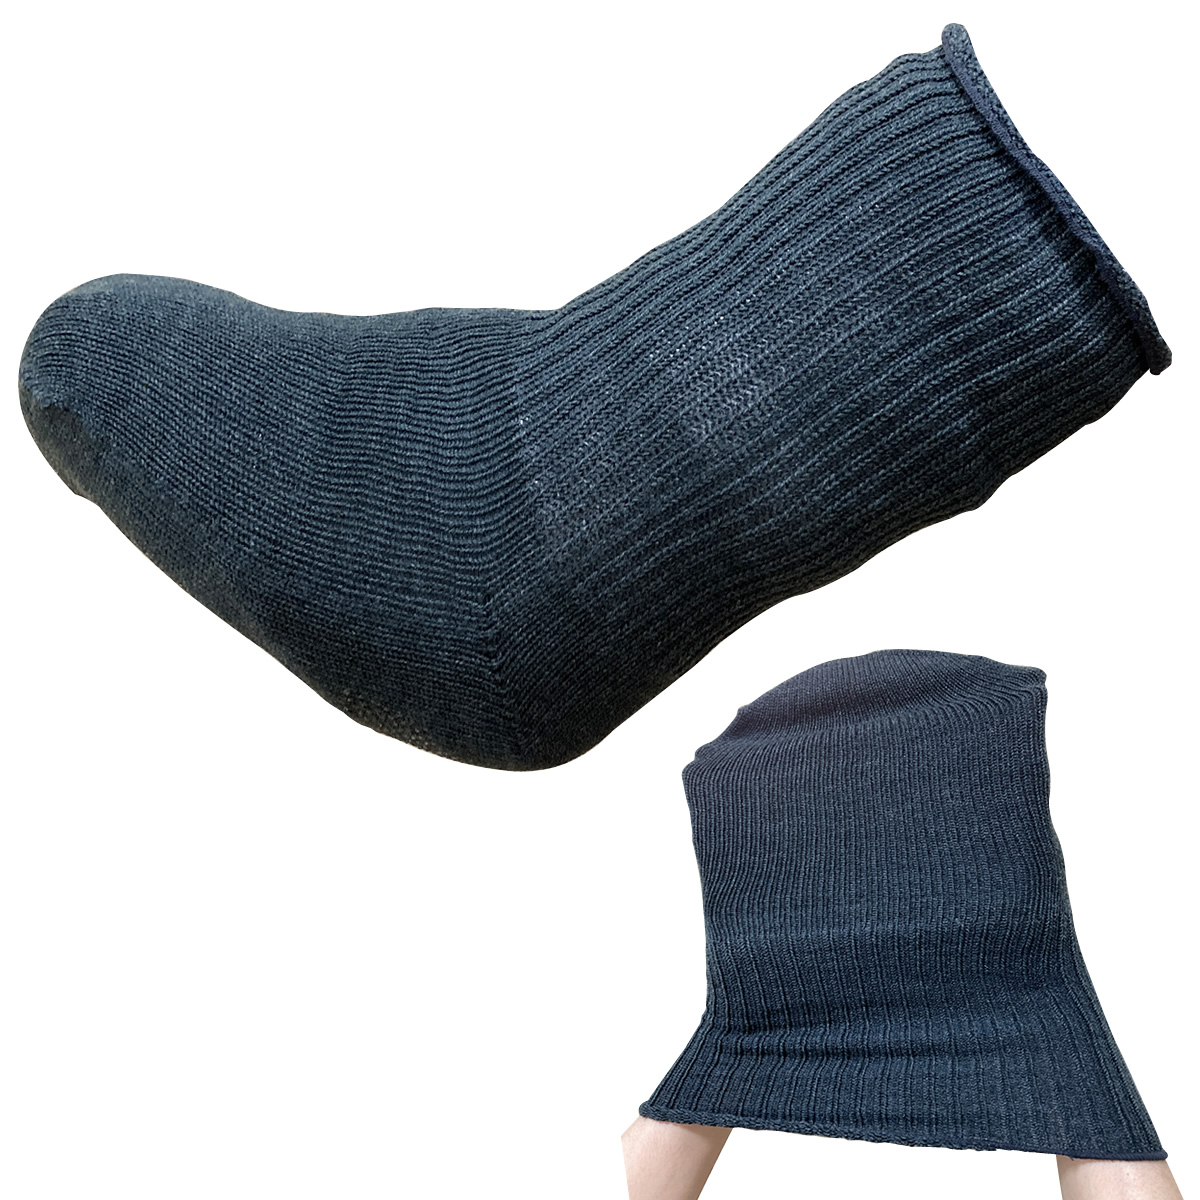 gibs. cover socks Special extension Chan 1 sheets ( one leg for ) slip prevention attaching left right combined use gibs socks .. good stretch . socks 